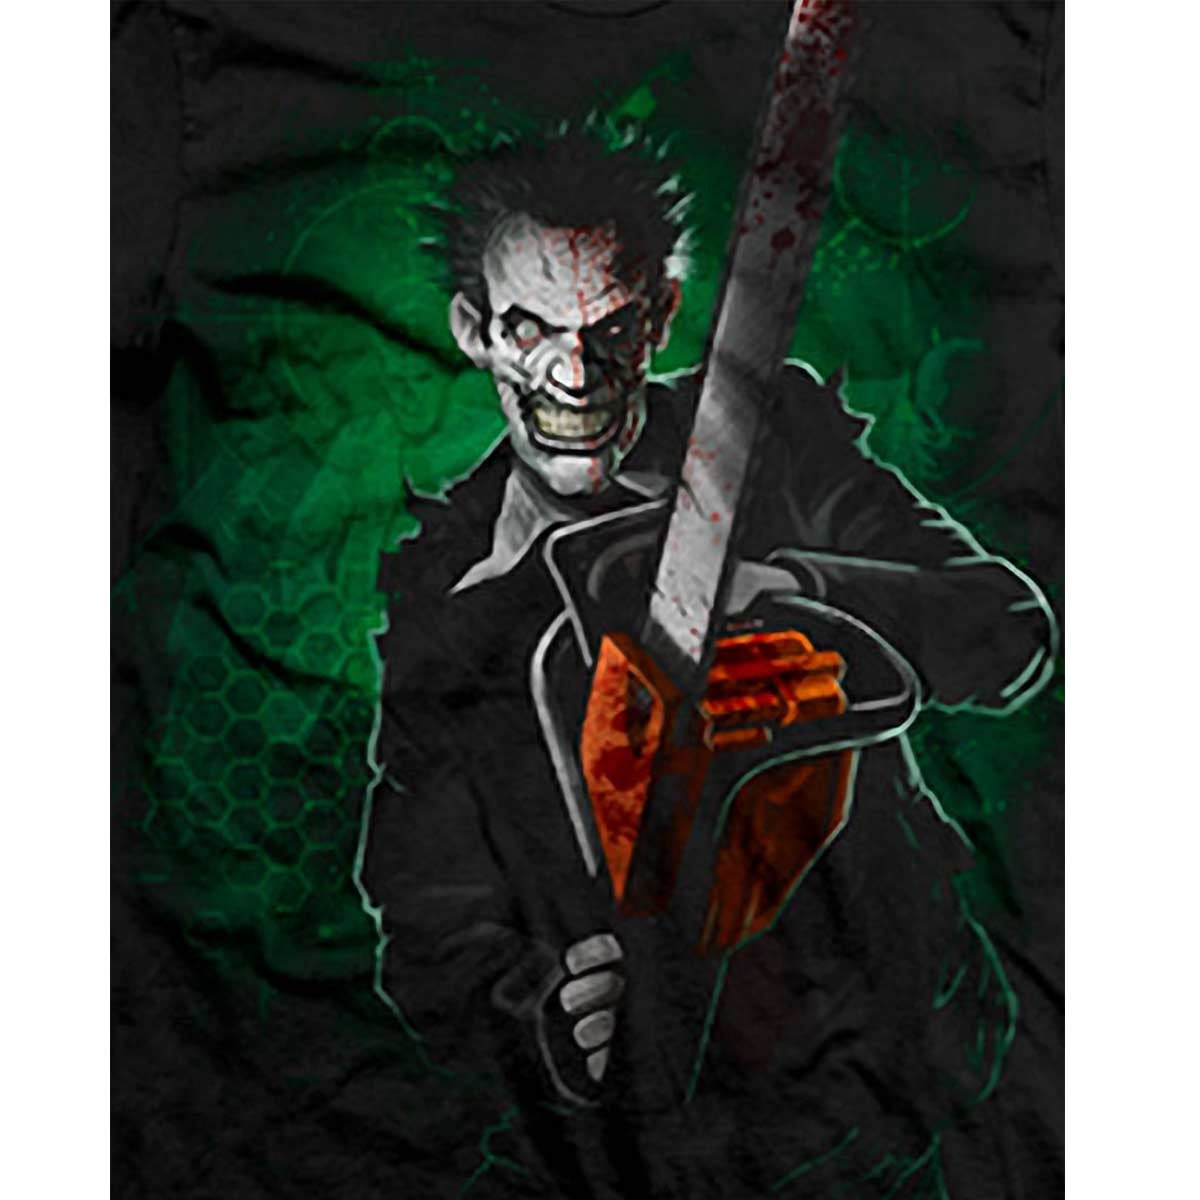 Men's Black T-Shirt Chainsaw Maniac - Another Way of Life